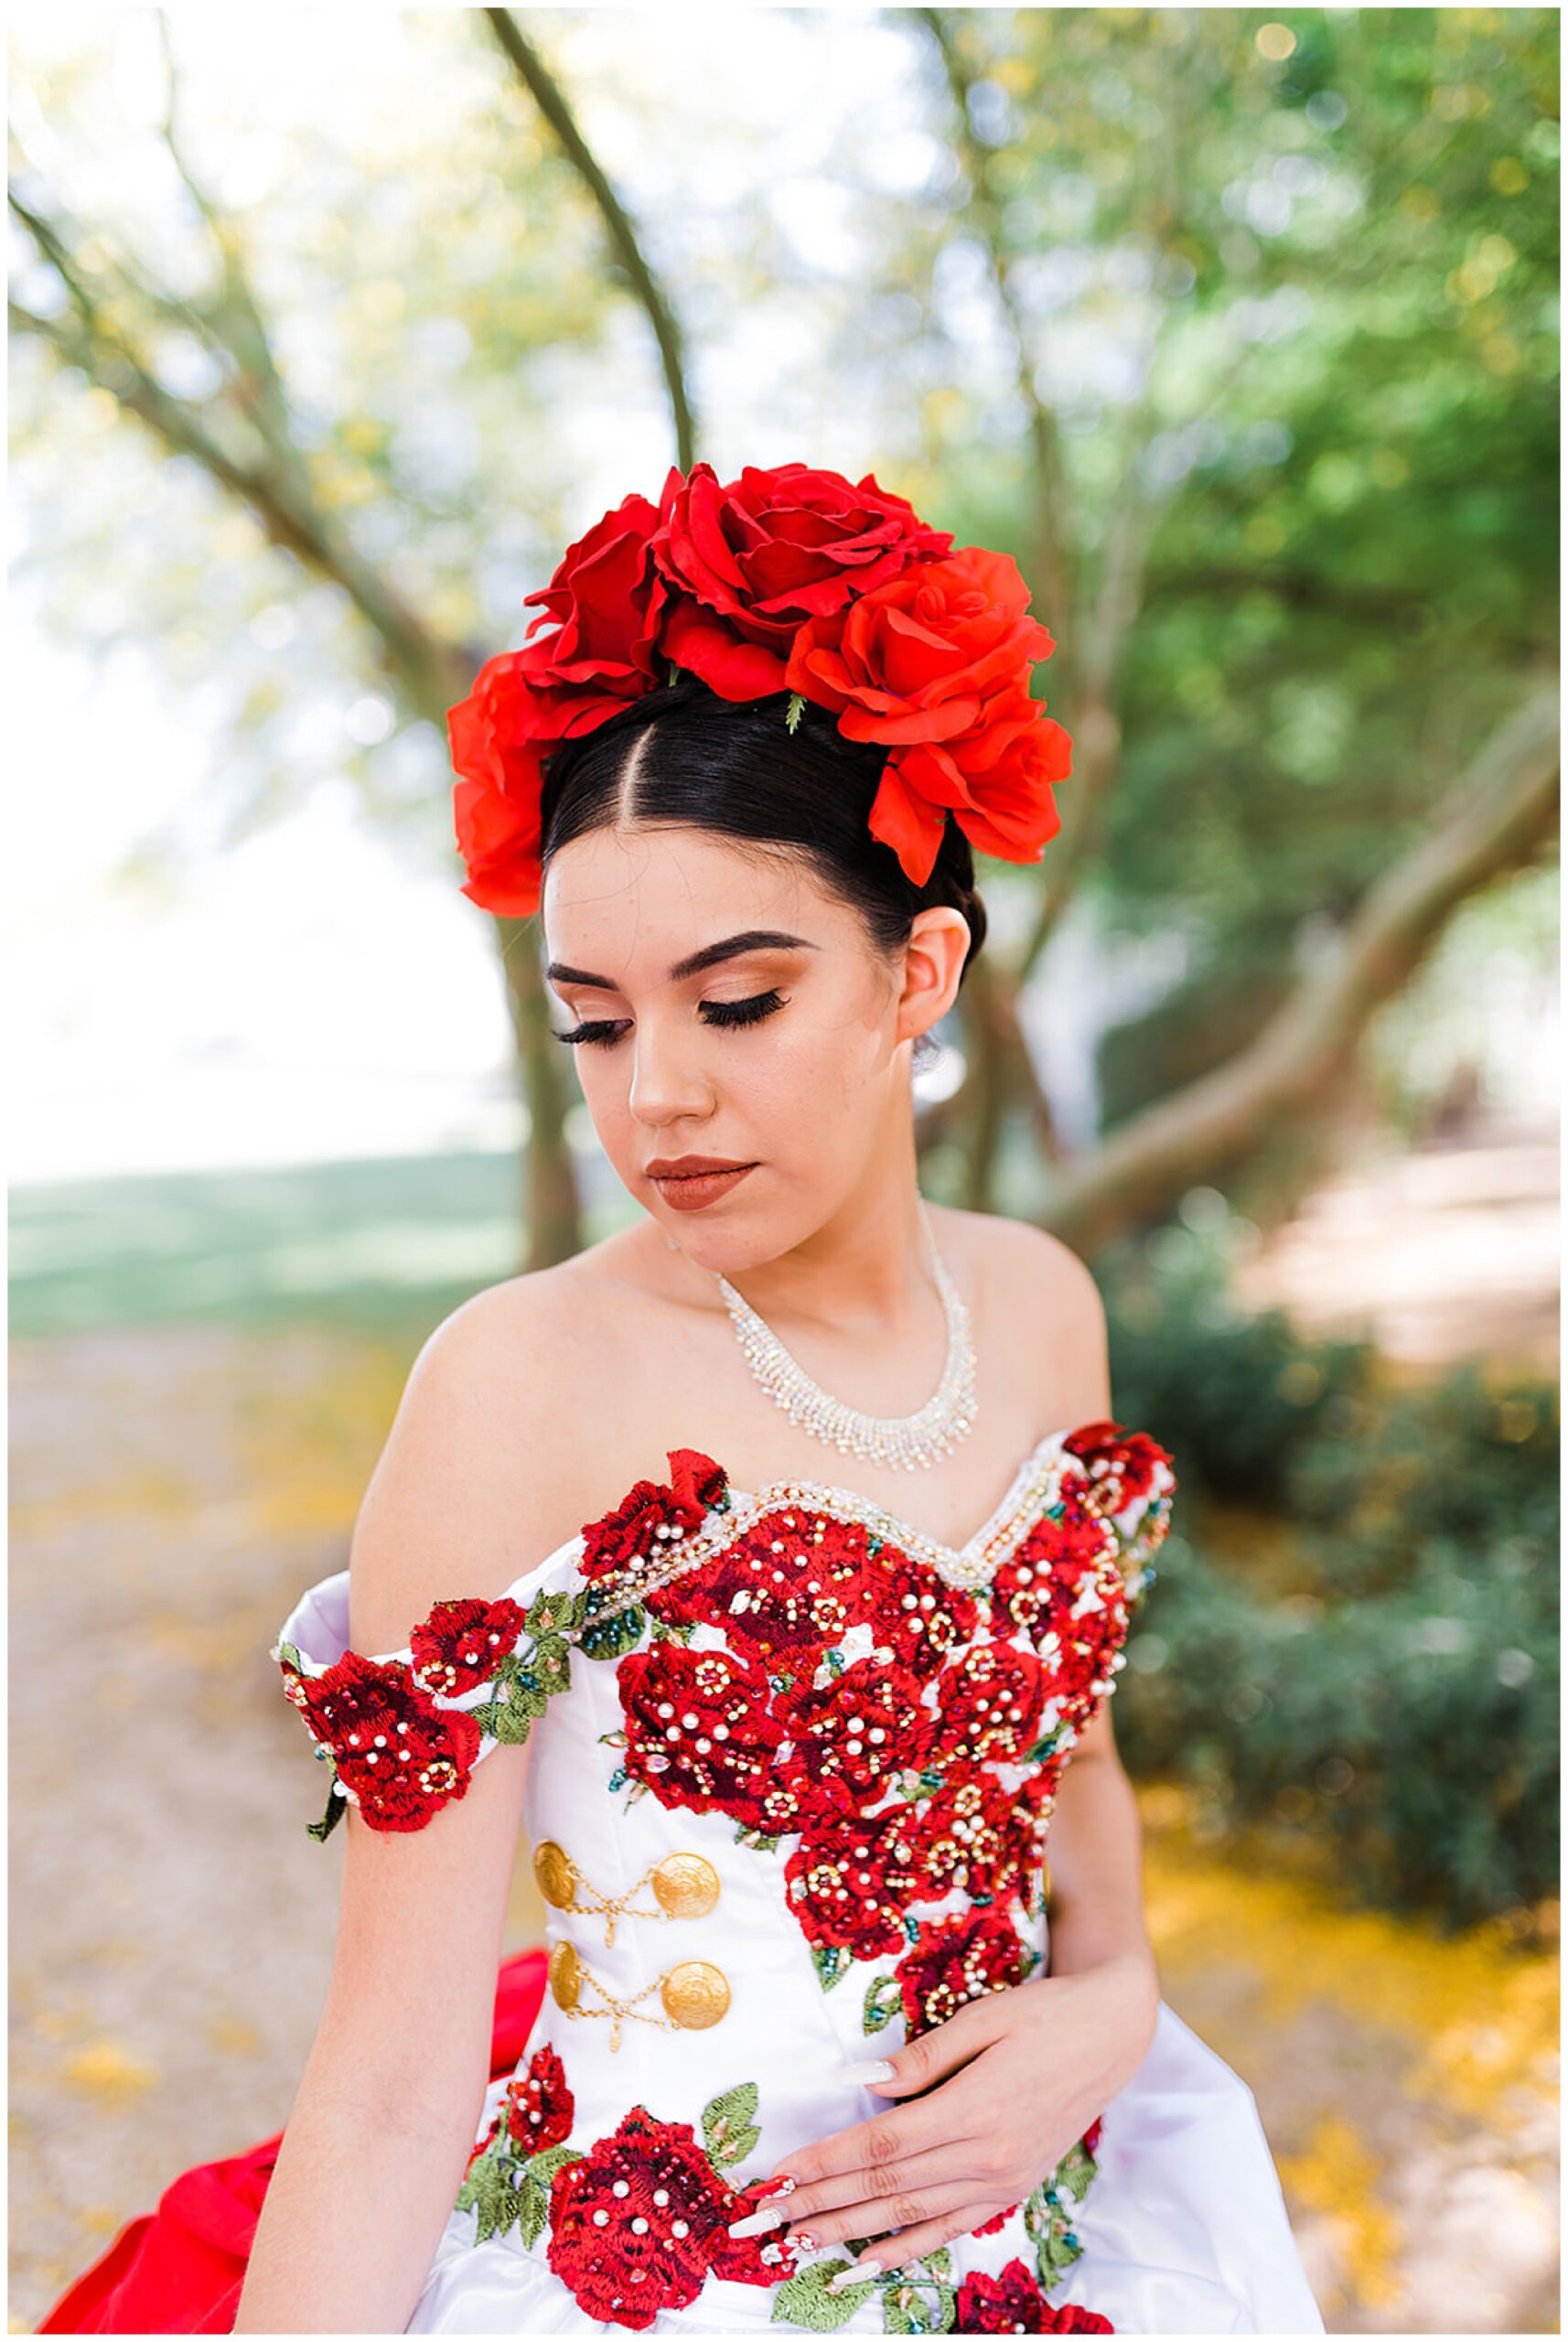 Teenager looks down her shoulder in an ornate red rose ballgown